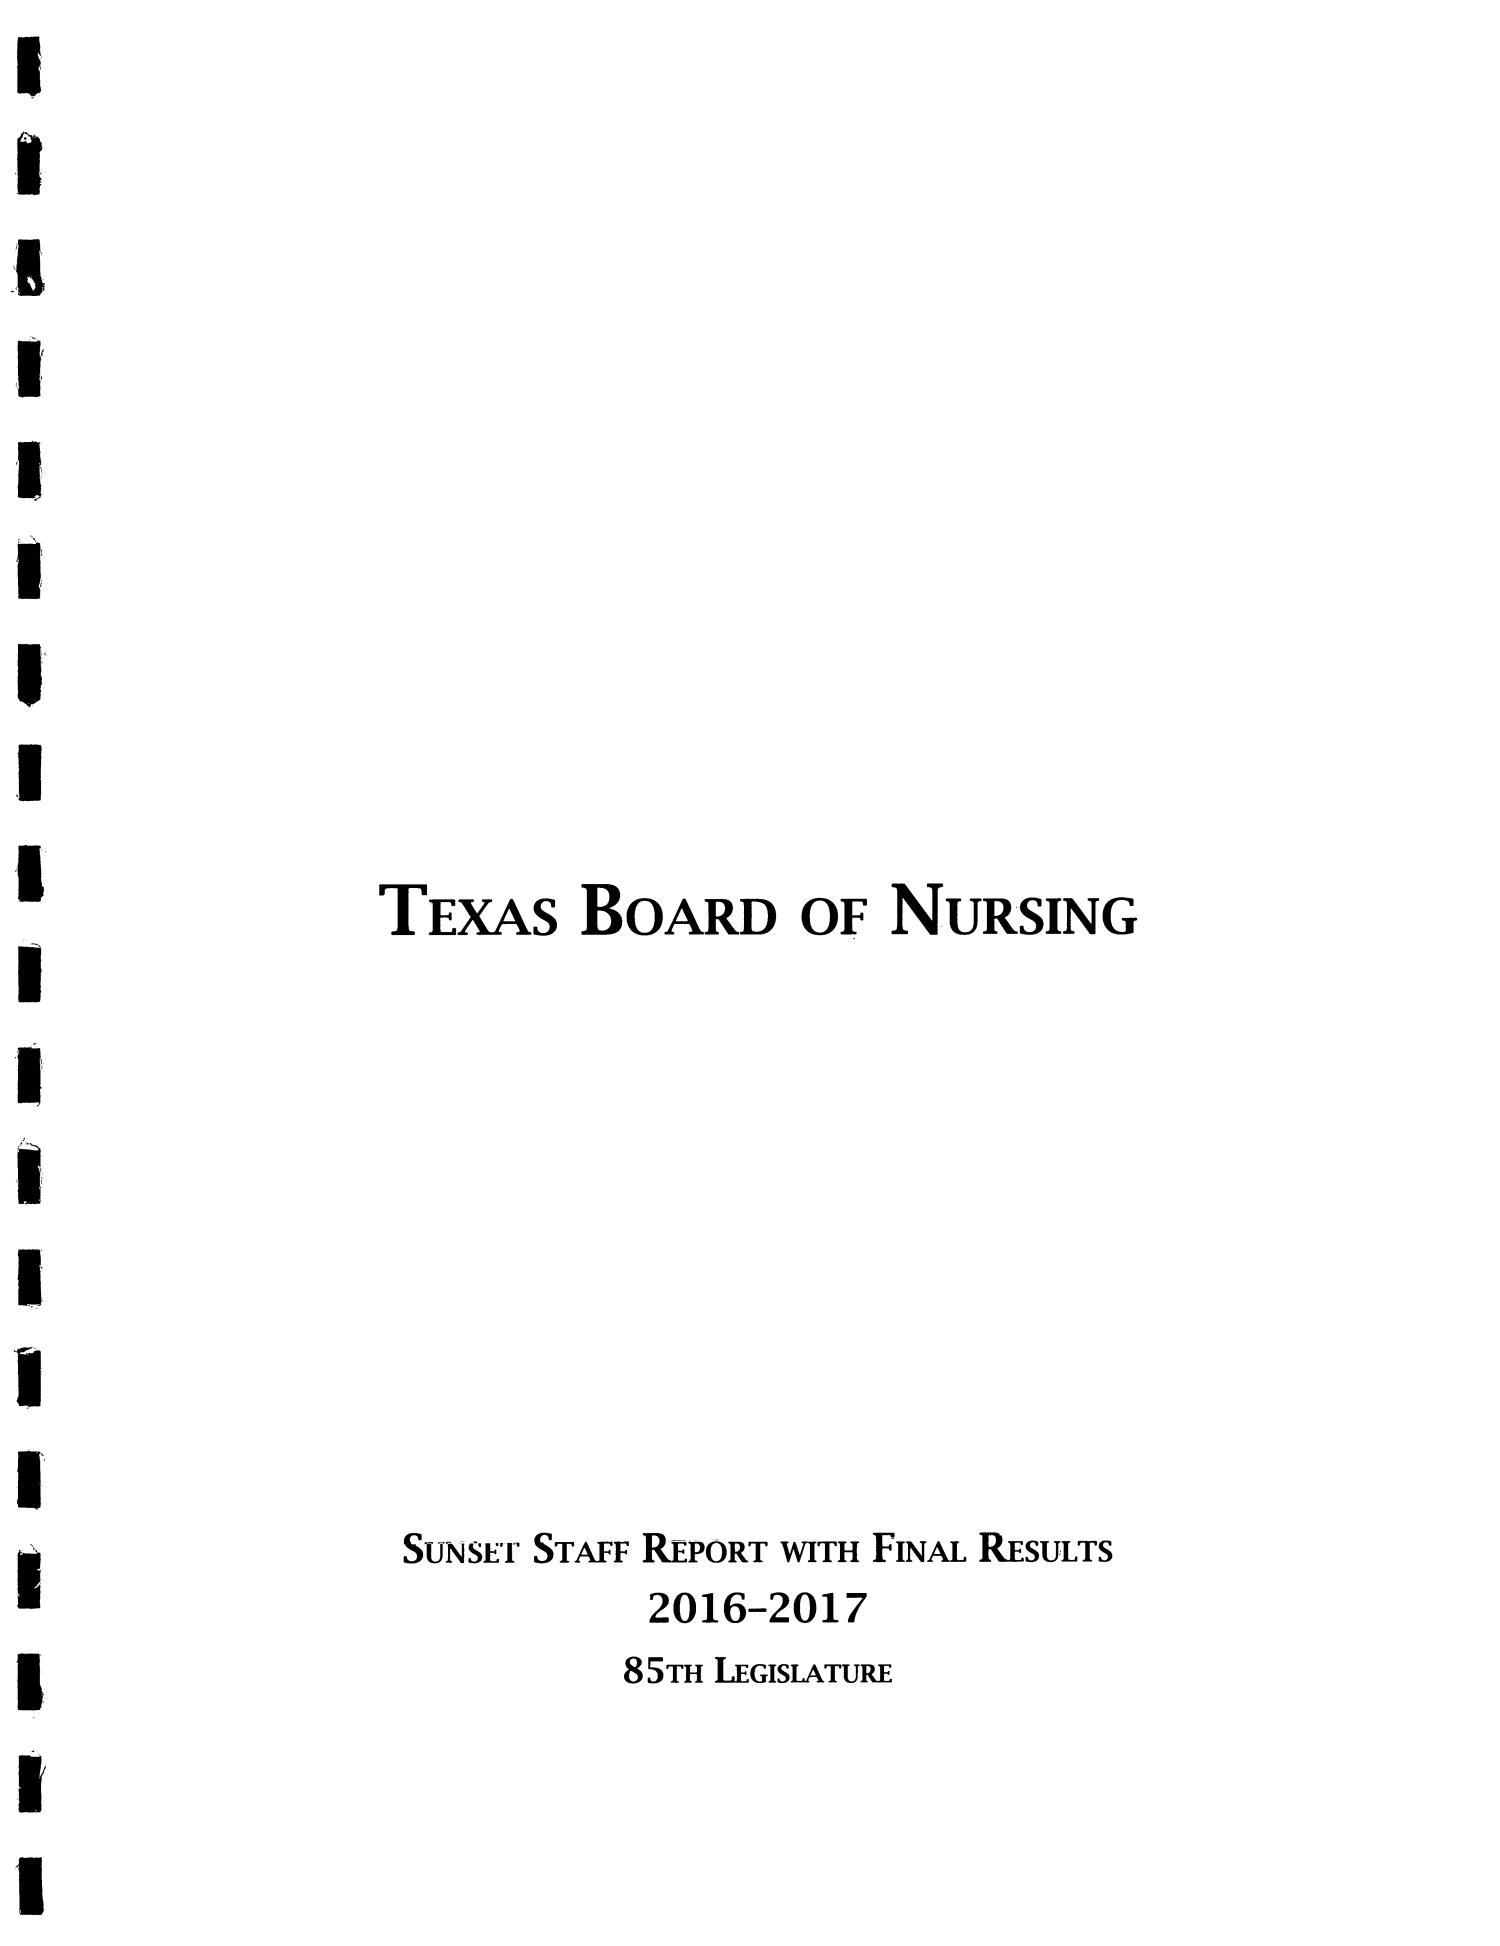 Staff Report with Final Results: Texas Board of Nursing
                                                
                                                    Title Page
                                                